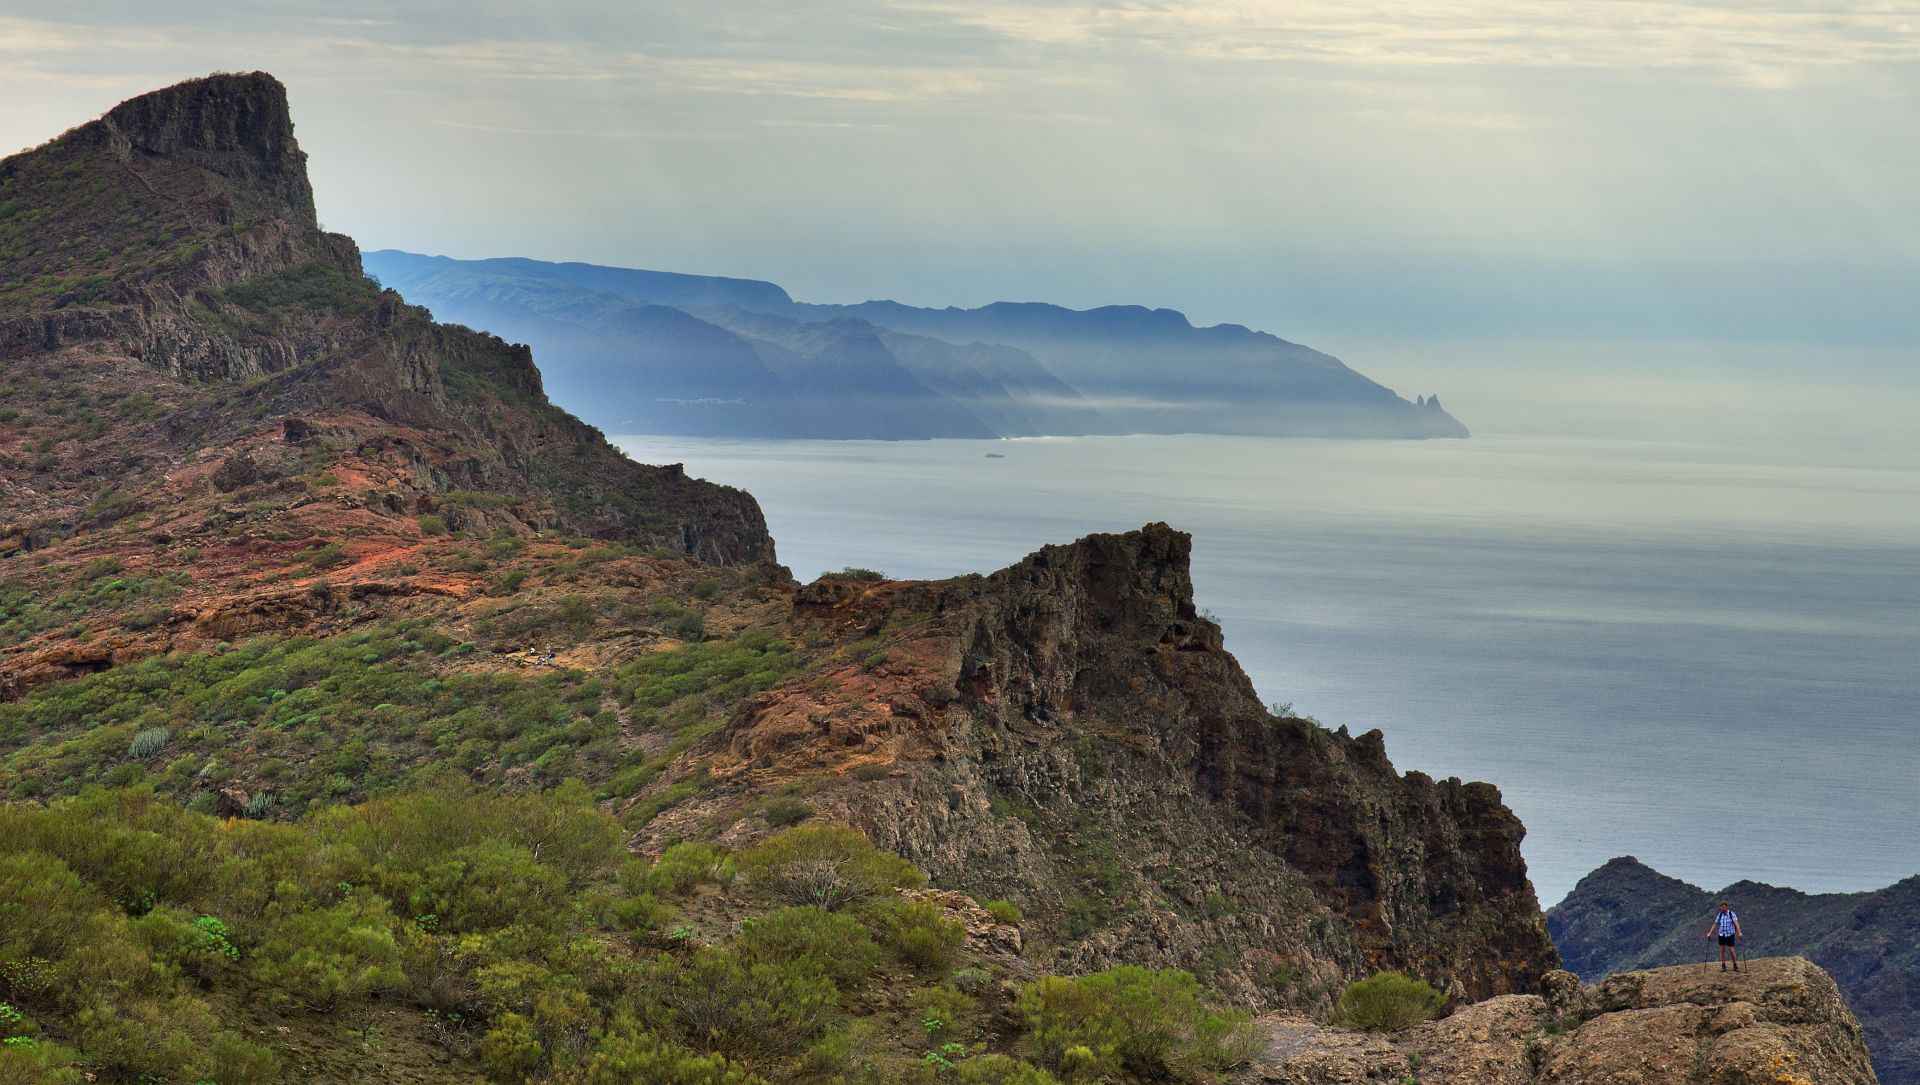 In the Teno mountains (and La Gomera in the background)